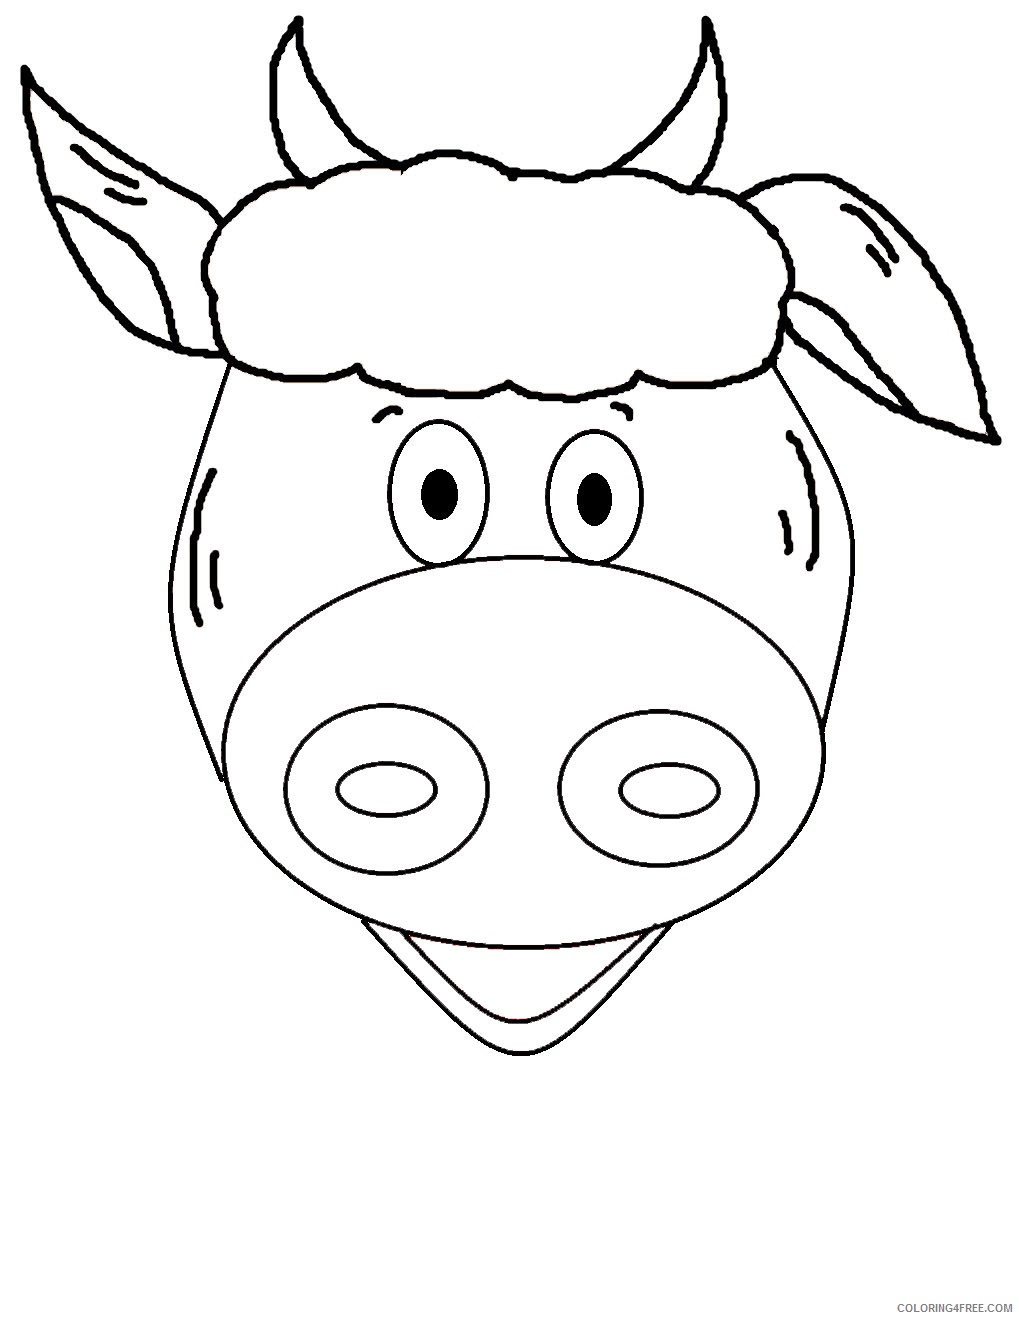 Cow Outline Coloring Pages cartoon cow face outline 15 Printable Coloring4free